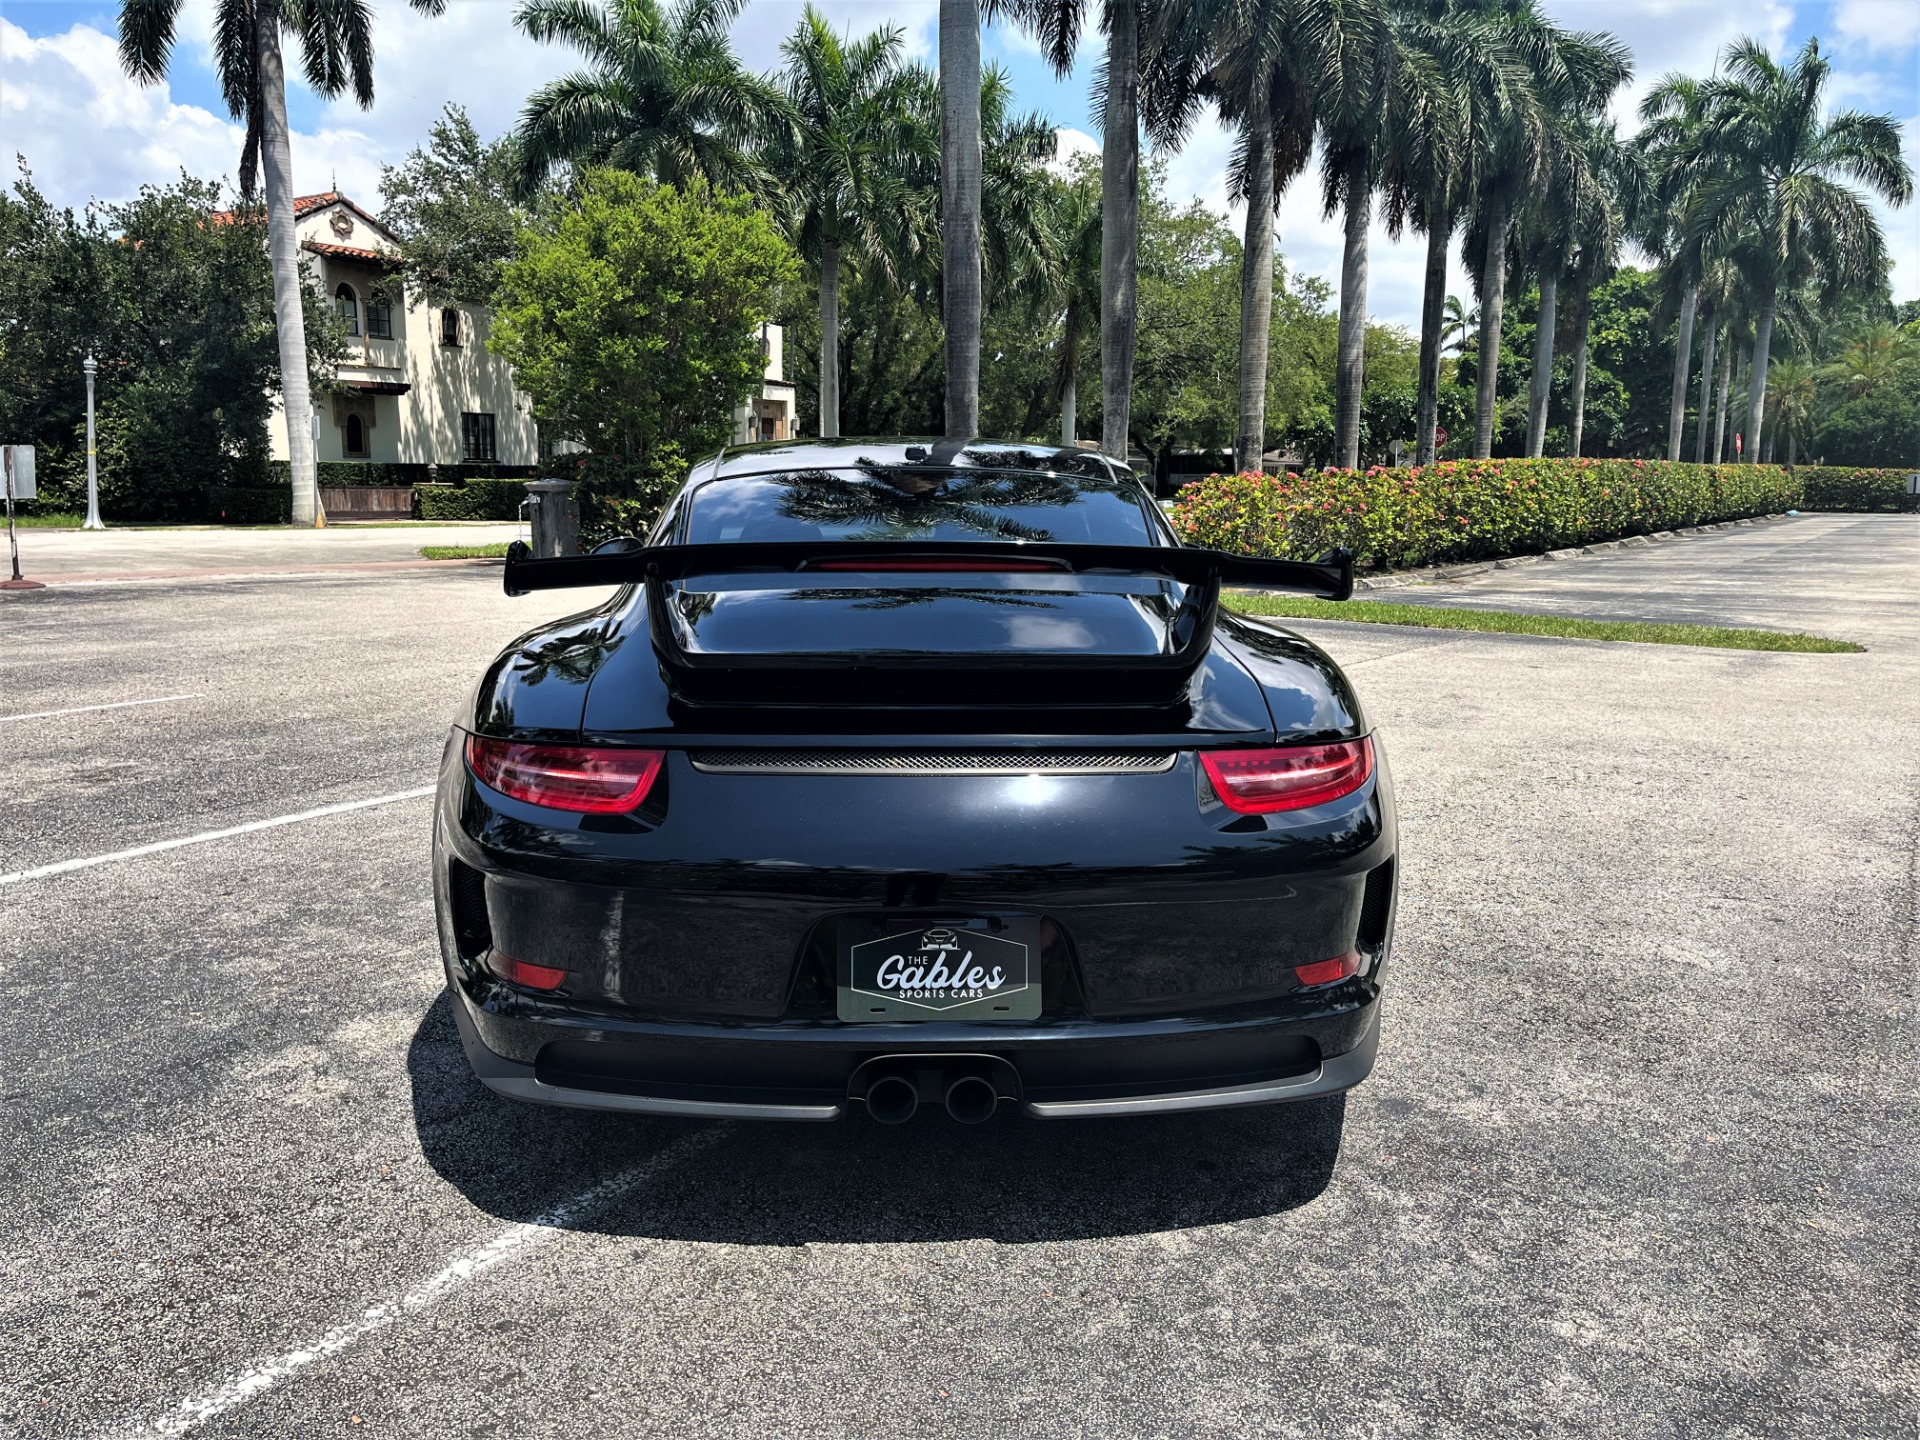 Used 2015 Porsche 911 GT3 for sale $157,850 at The Gables Sports Cars in Miami FL 33146 4